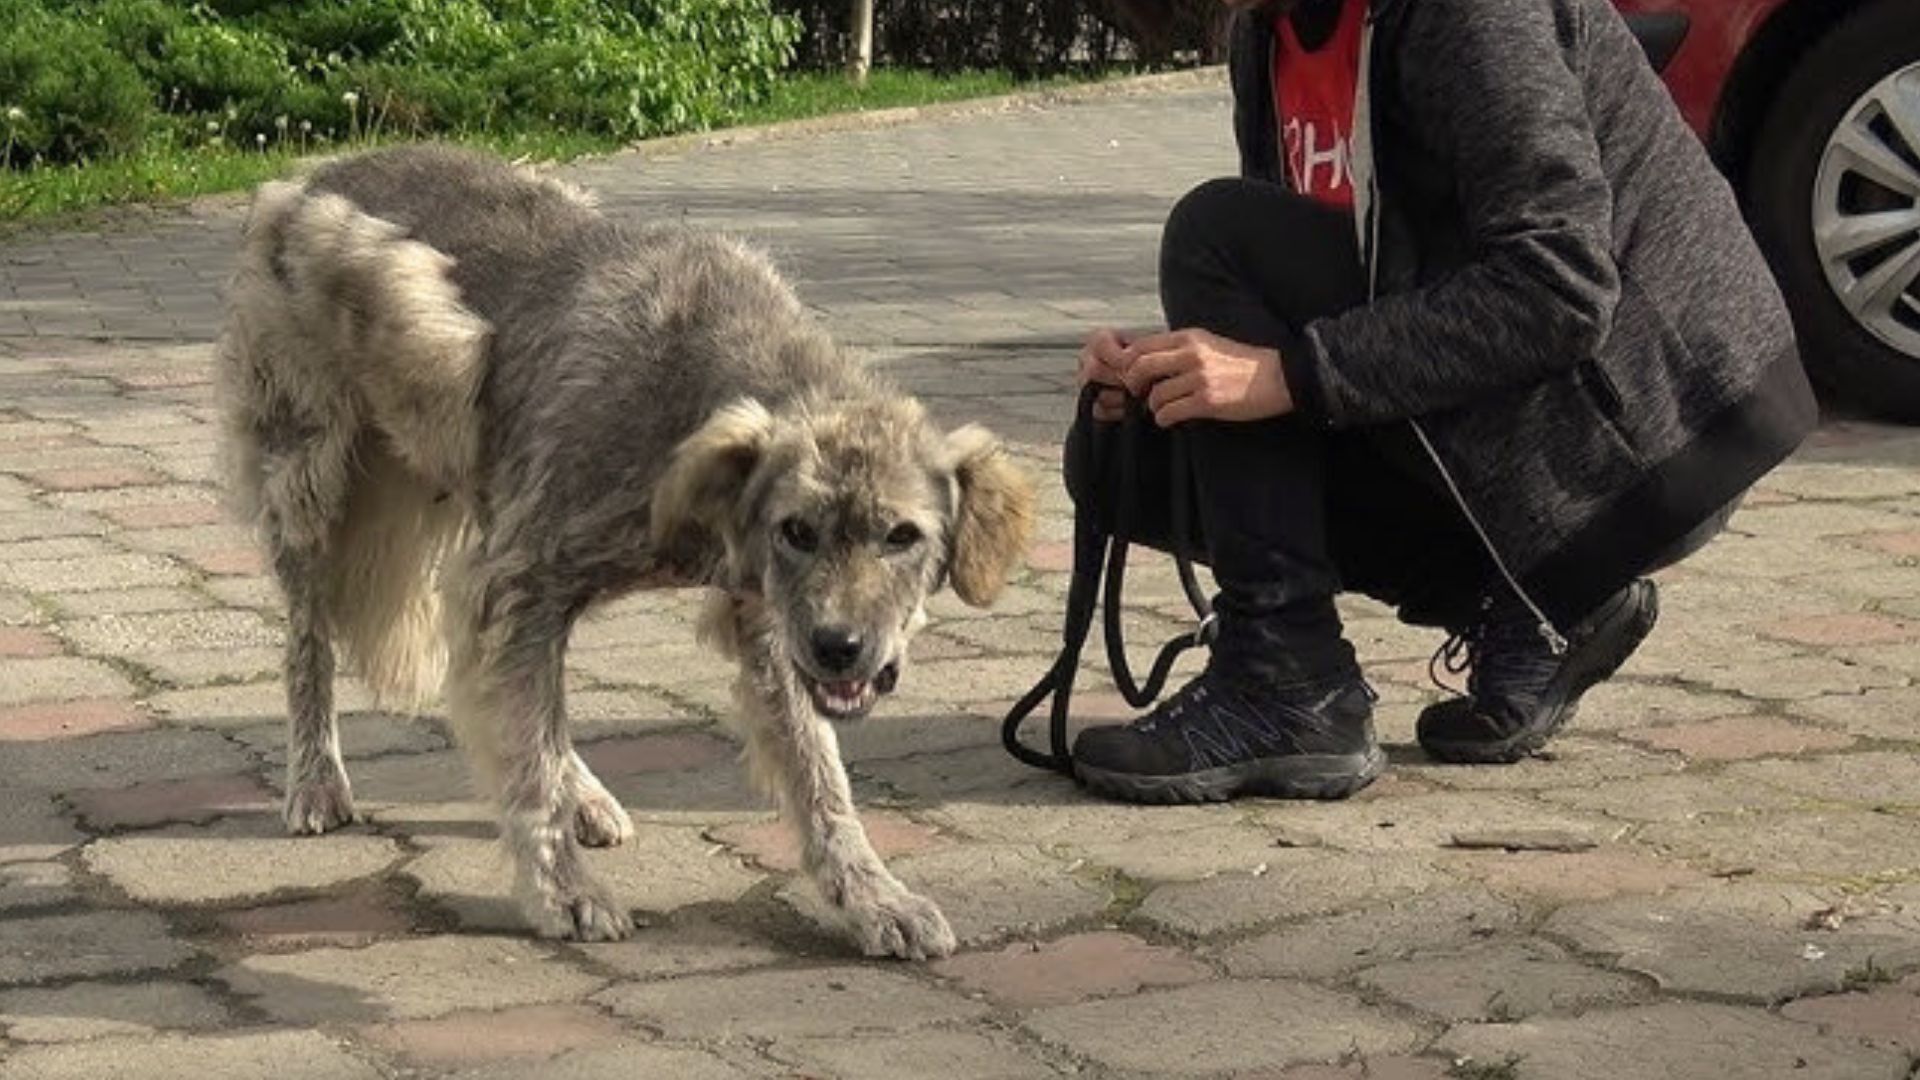 The Starving Frightened Dog Wags Her Tail For The Very First Time